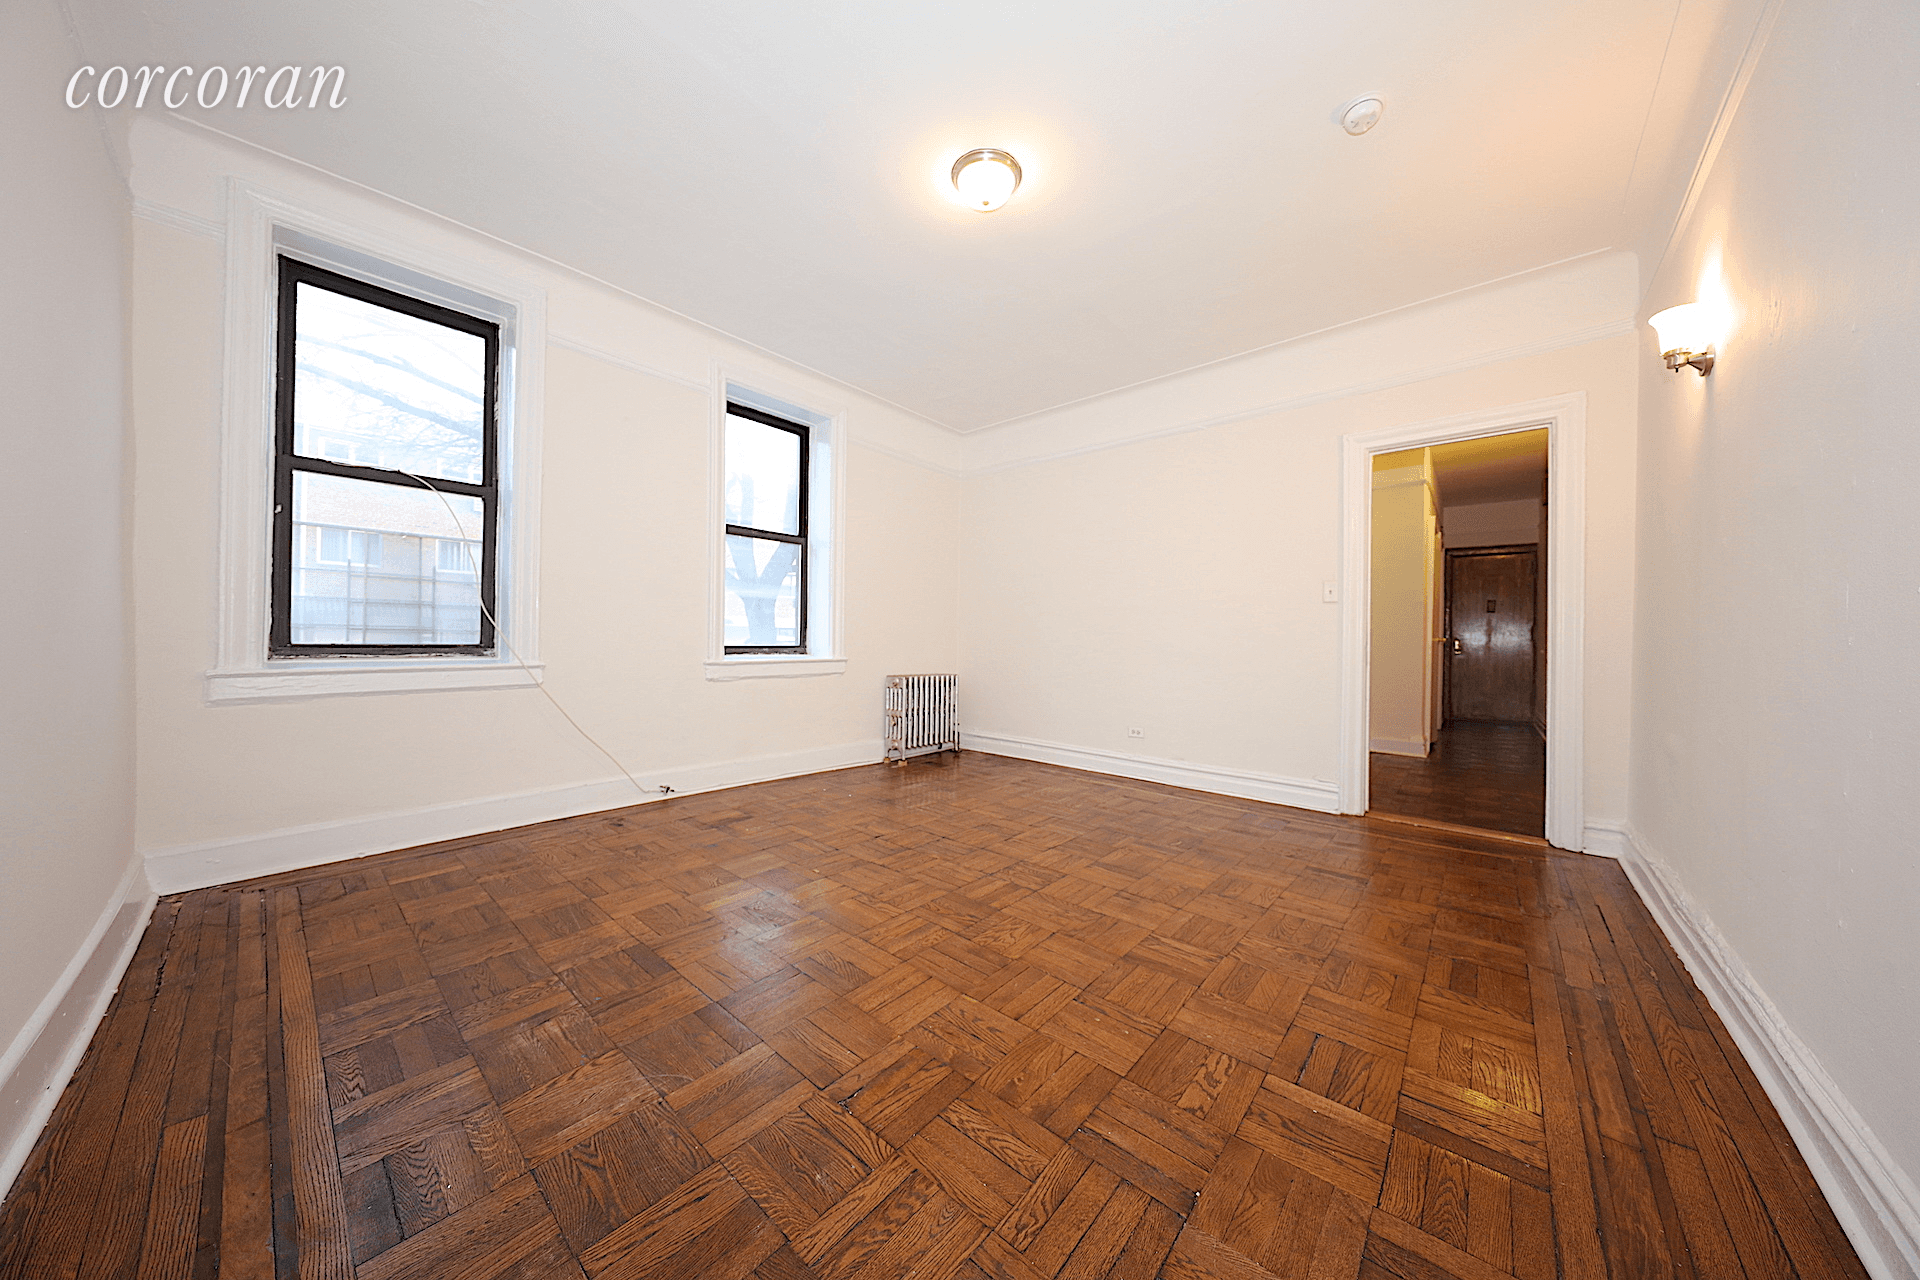 RENOVATED ! ! Spacious 3 Br apartment with lofty living room, king and queen size bedrooms, nice hardwood floors throughout, ample closet space, separated windowed kitchen with full size stainless ...